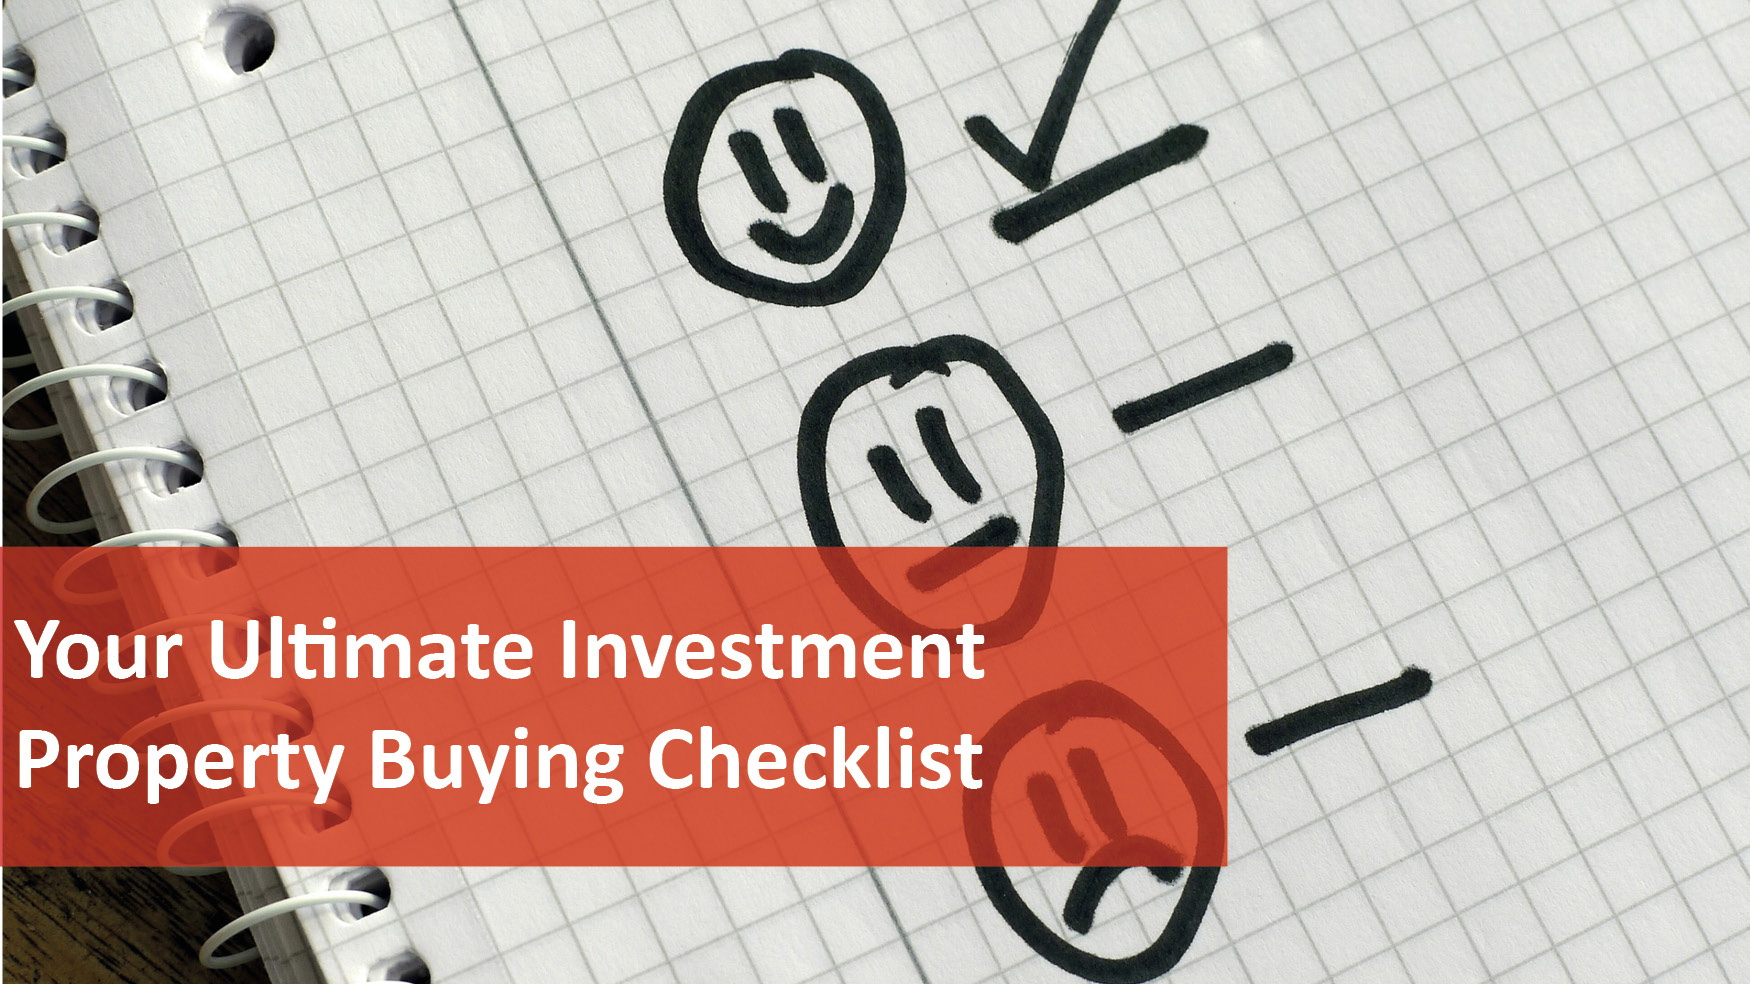 We Love Rentals Ultimate Investment Property Checklist